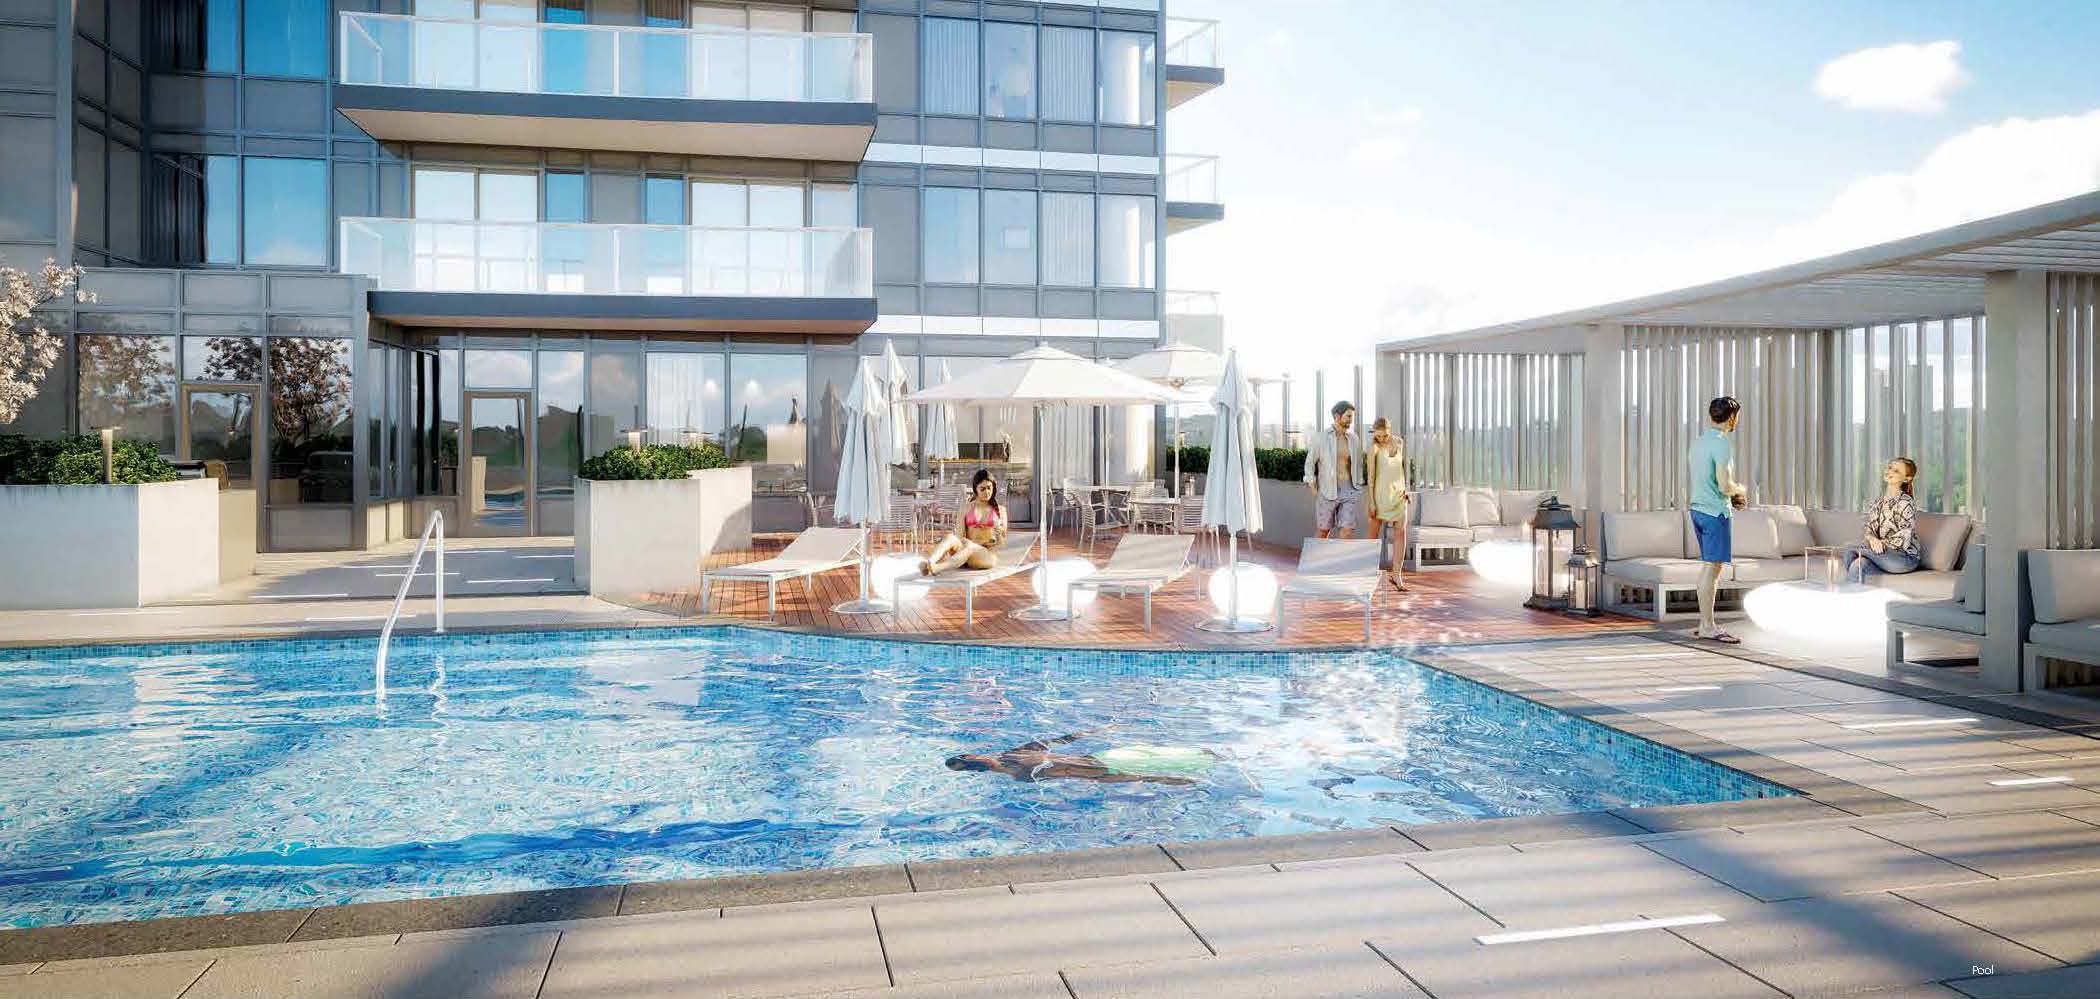 Rendering of Universal City 3 Condos outdoor swimming pool.